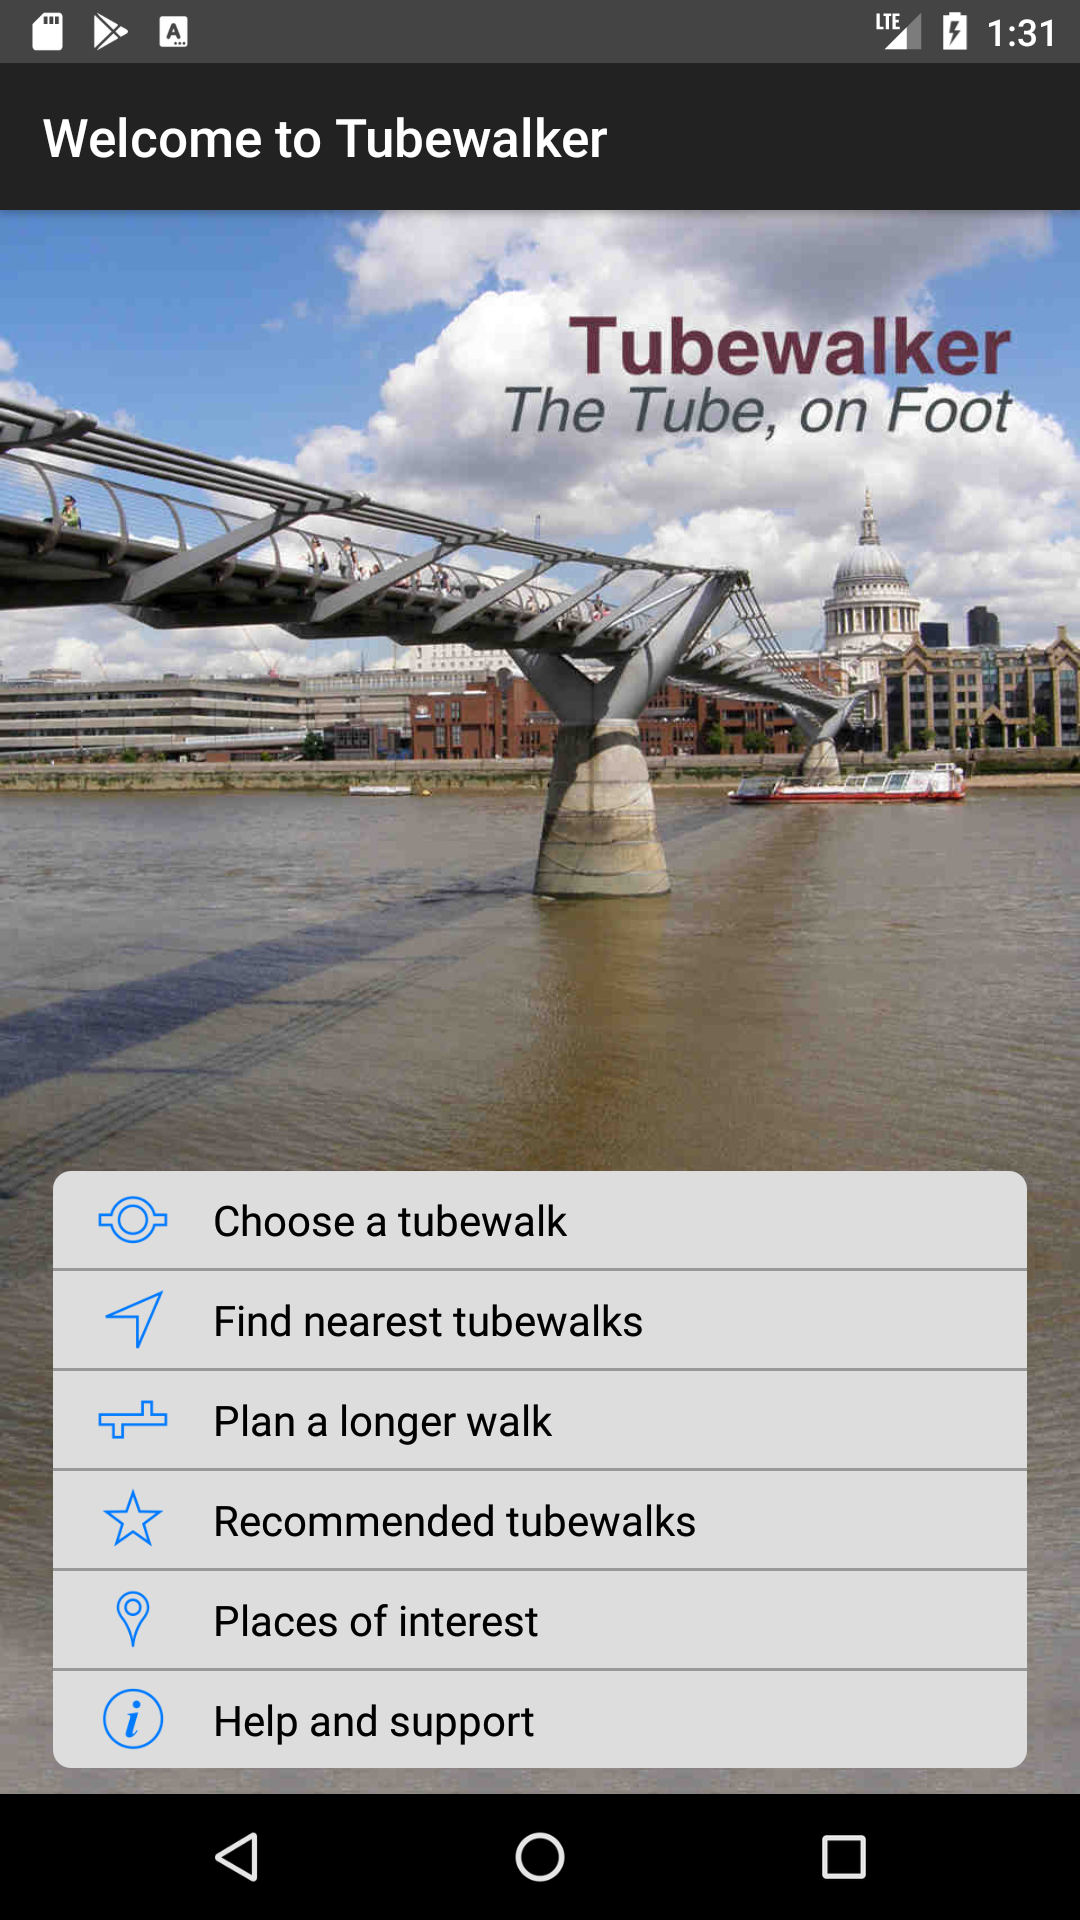 The main menu of the Tubewalker Android application